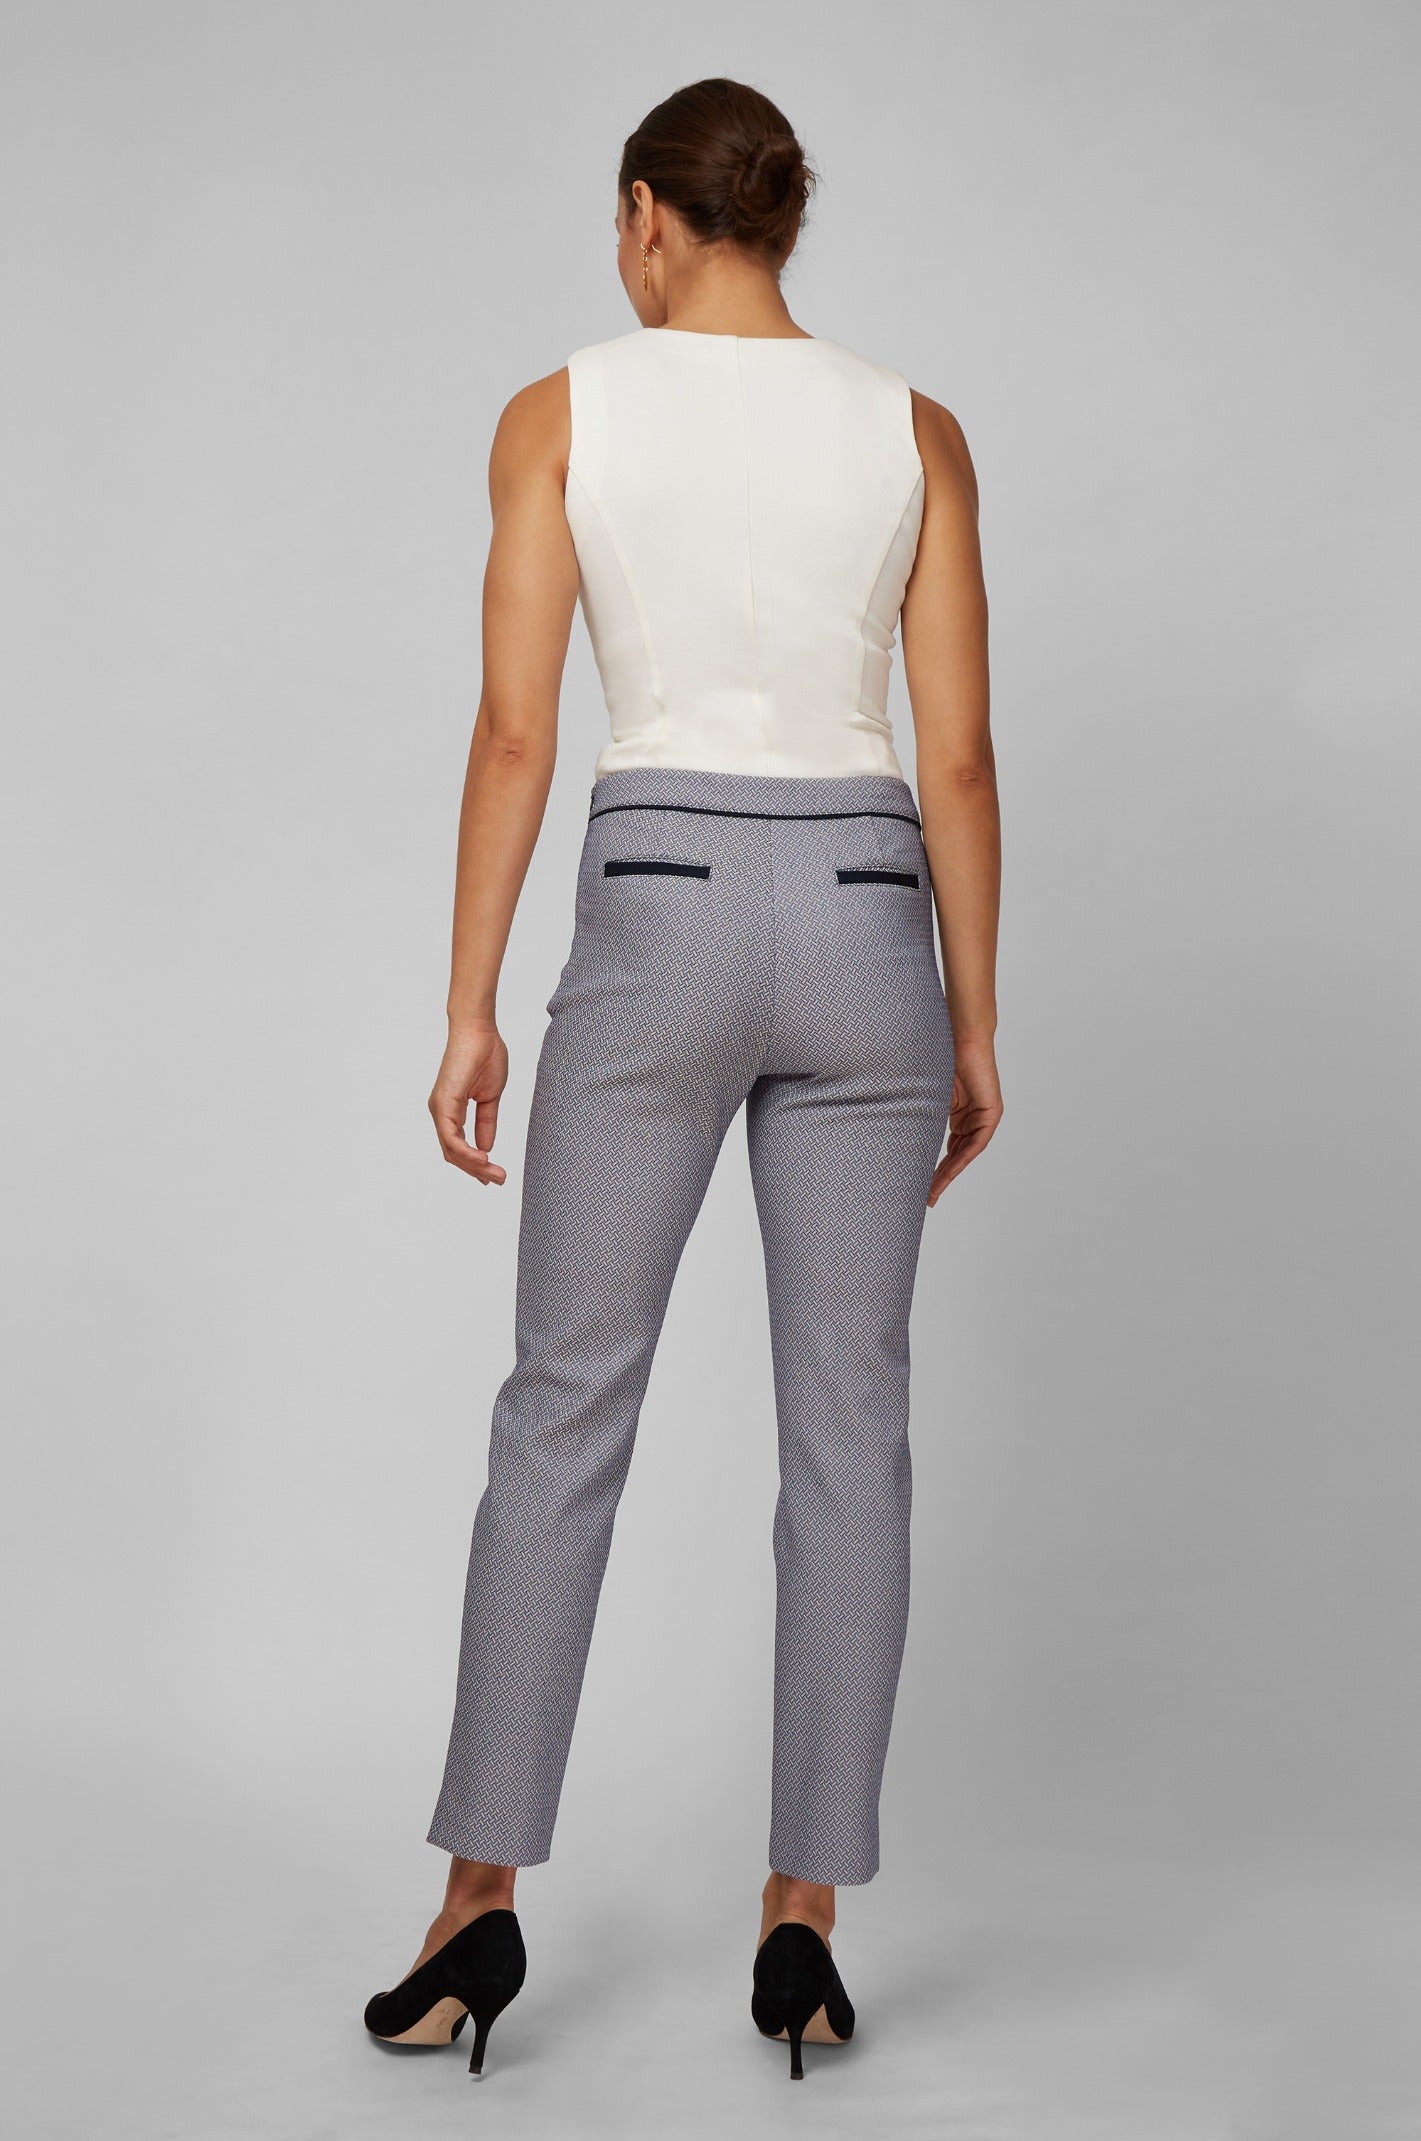 Women' Business Justine Pants - Basketweave Jacquard NORA GARDNER | OFFICIAL STORE for work and office